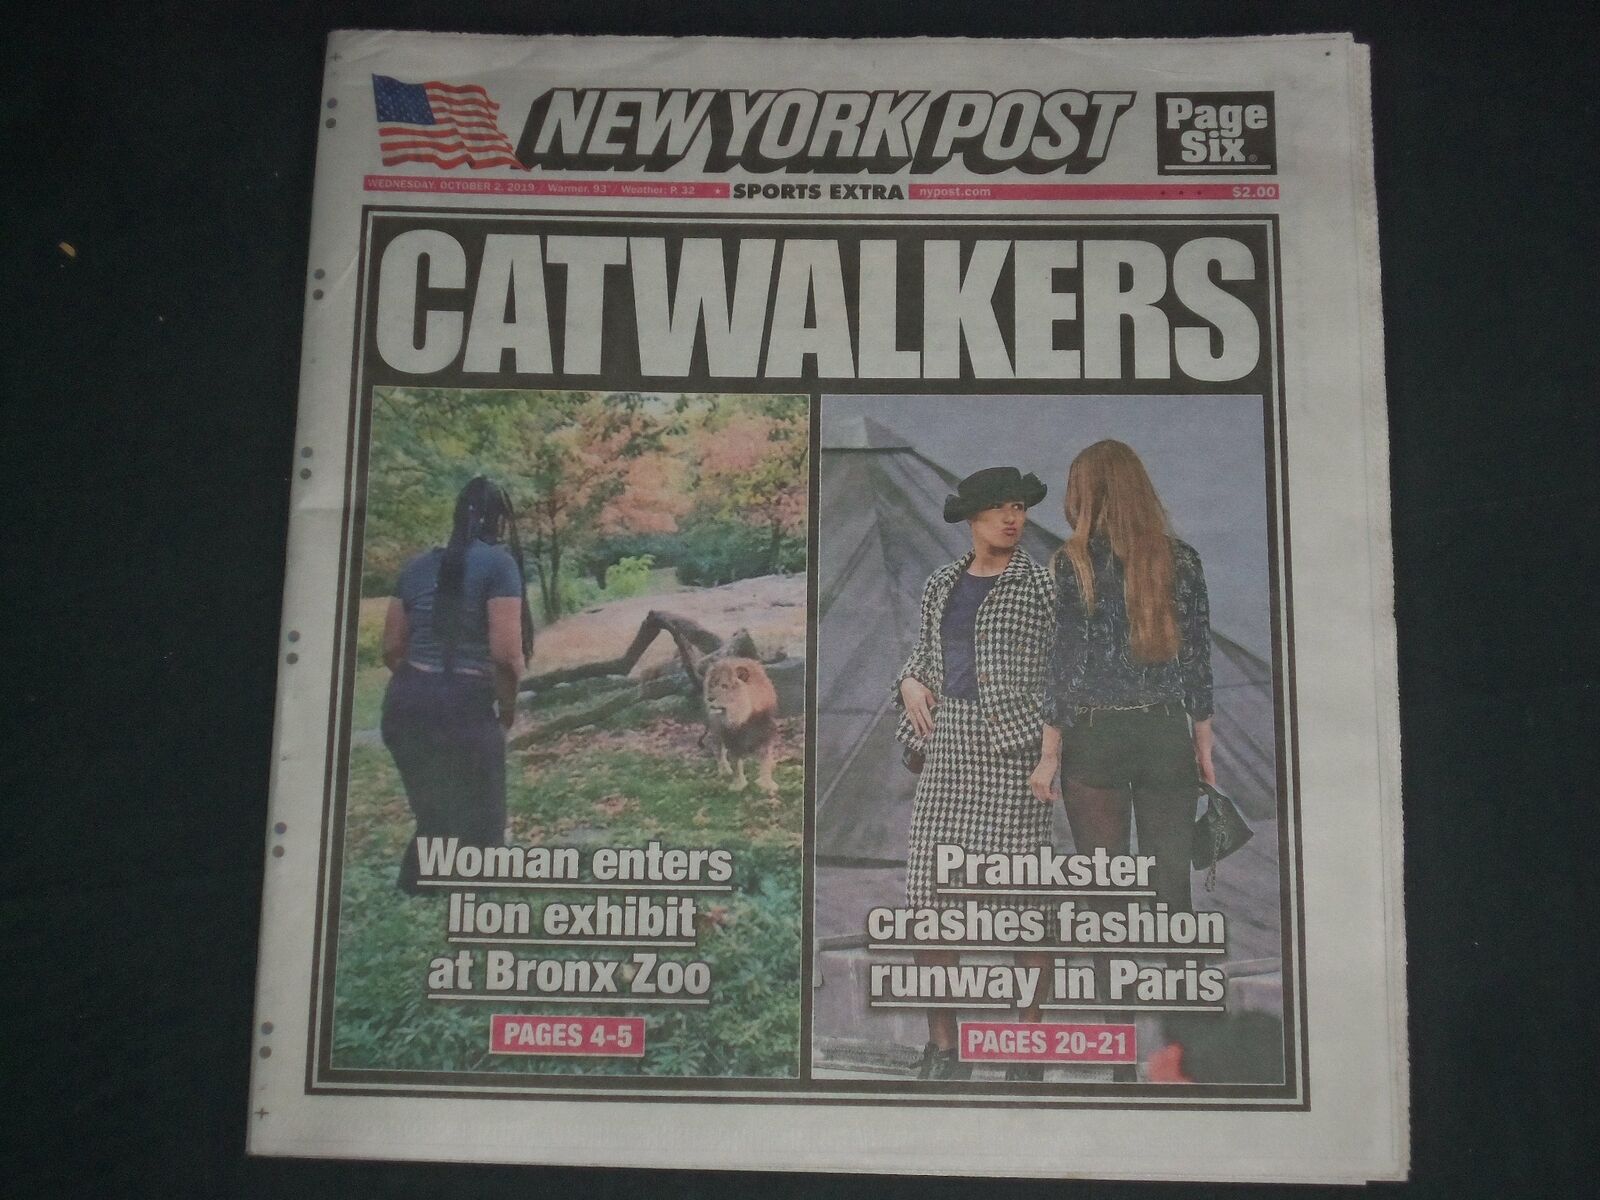 2019 OCTOBER 2 NEW YORK POST NEWSPAPER - WOMAN ENTERS LION EXHIBIT AT BRONX ZOO